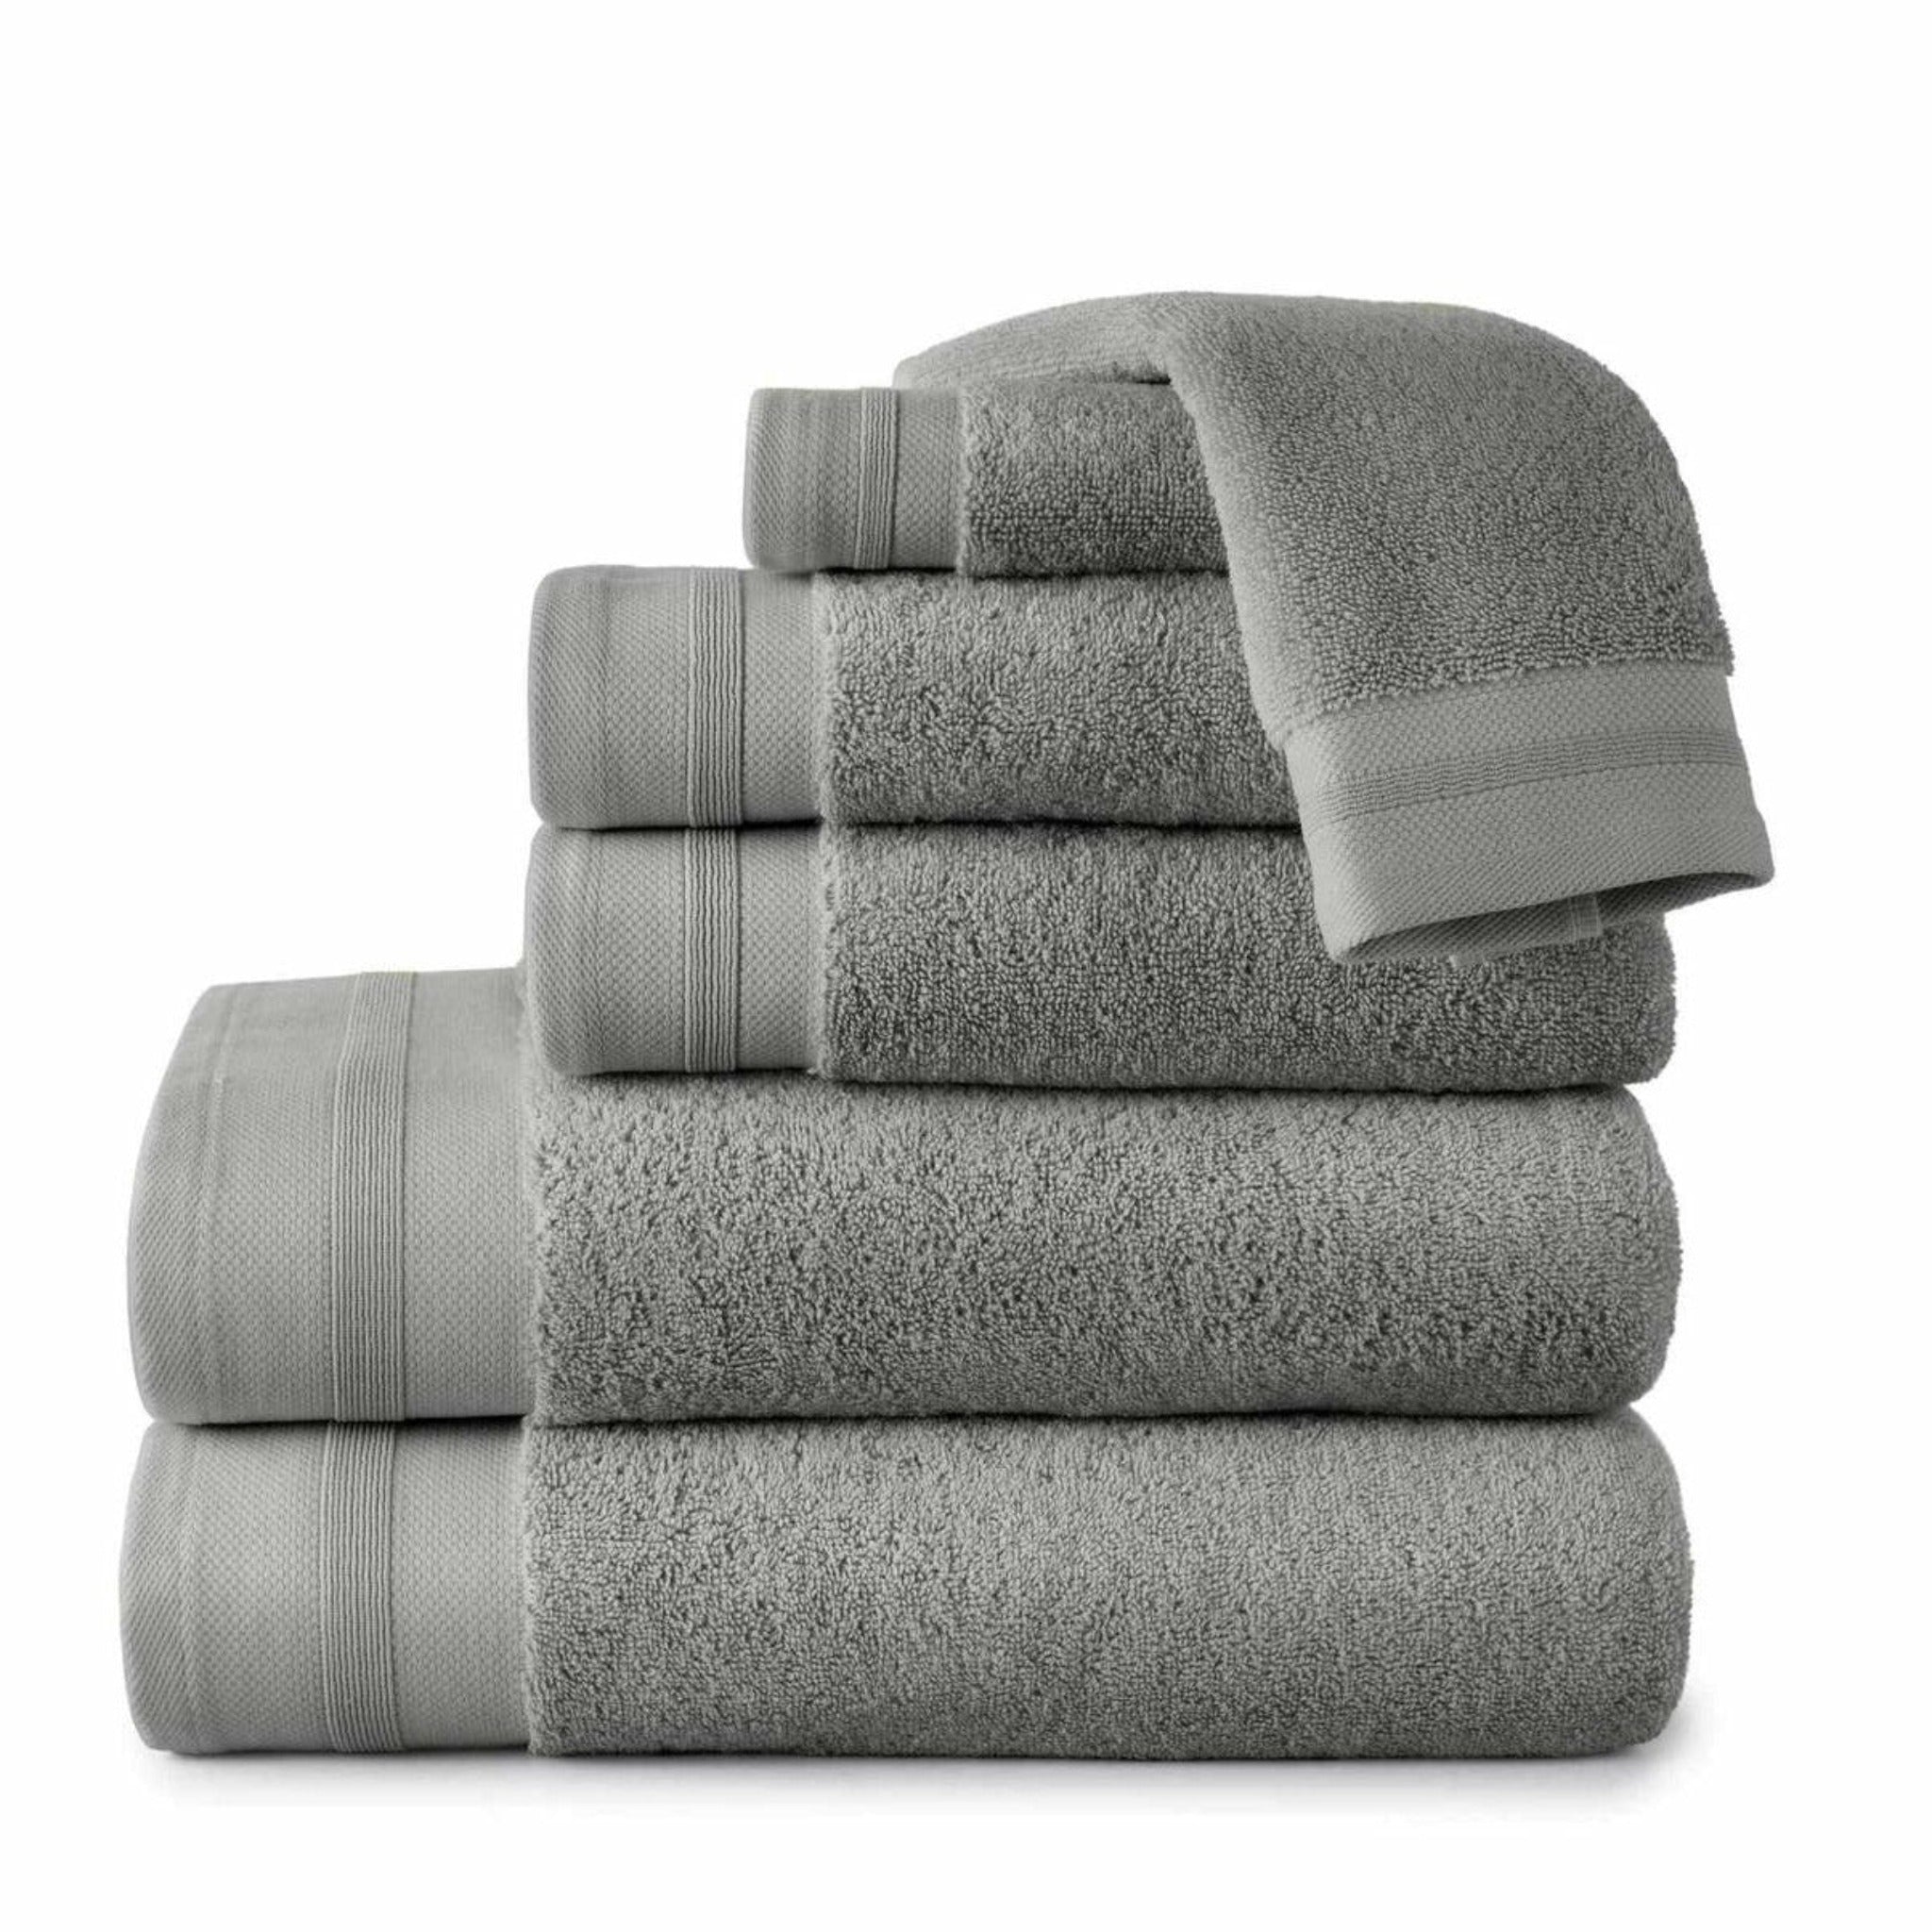 Peacock Alley 2 Bath Towels, NEW NWT, pewter light gray, Terry